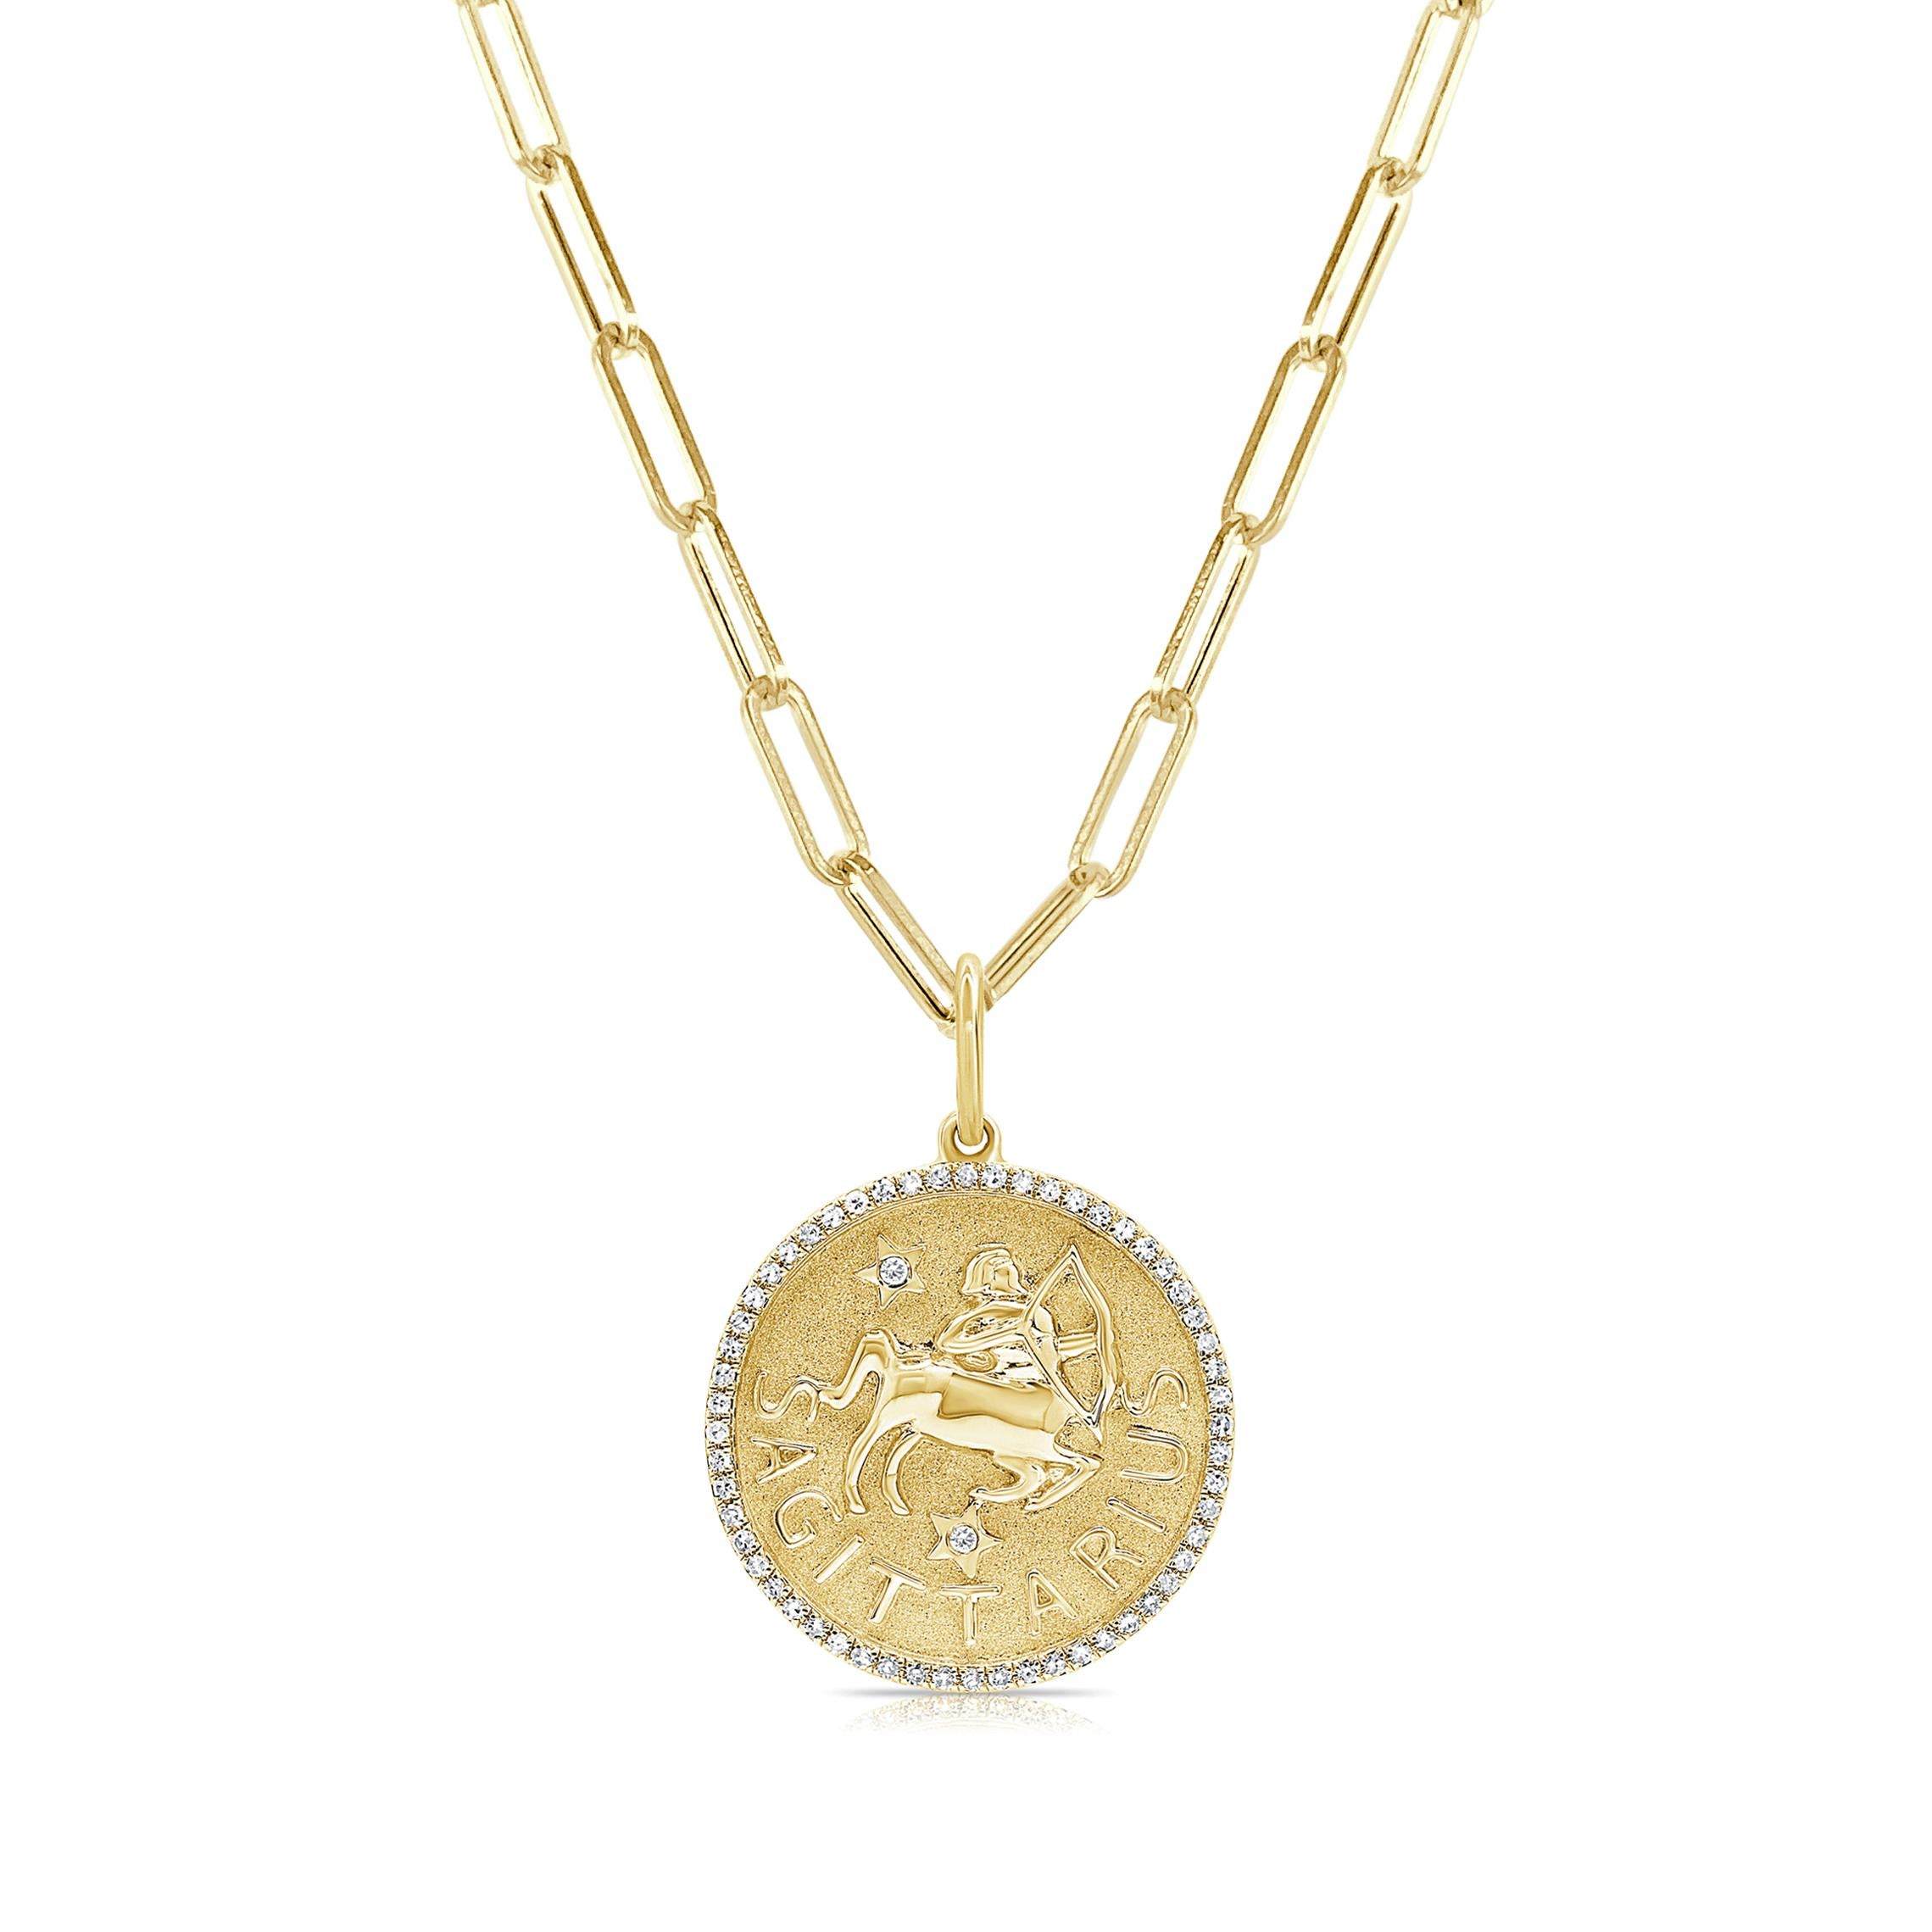 Express your mystical soul by wearing your Zodiac sign! These beautiful Zodiac Necklaces are crafted of 14K Yellow Gold and features approximately 0.21 carats (depends on zodiac) of natural round white Diamonds and hangs on an 14K Yellow Gold 18